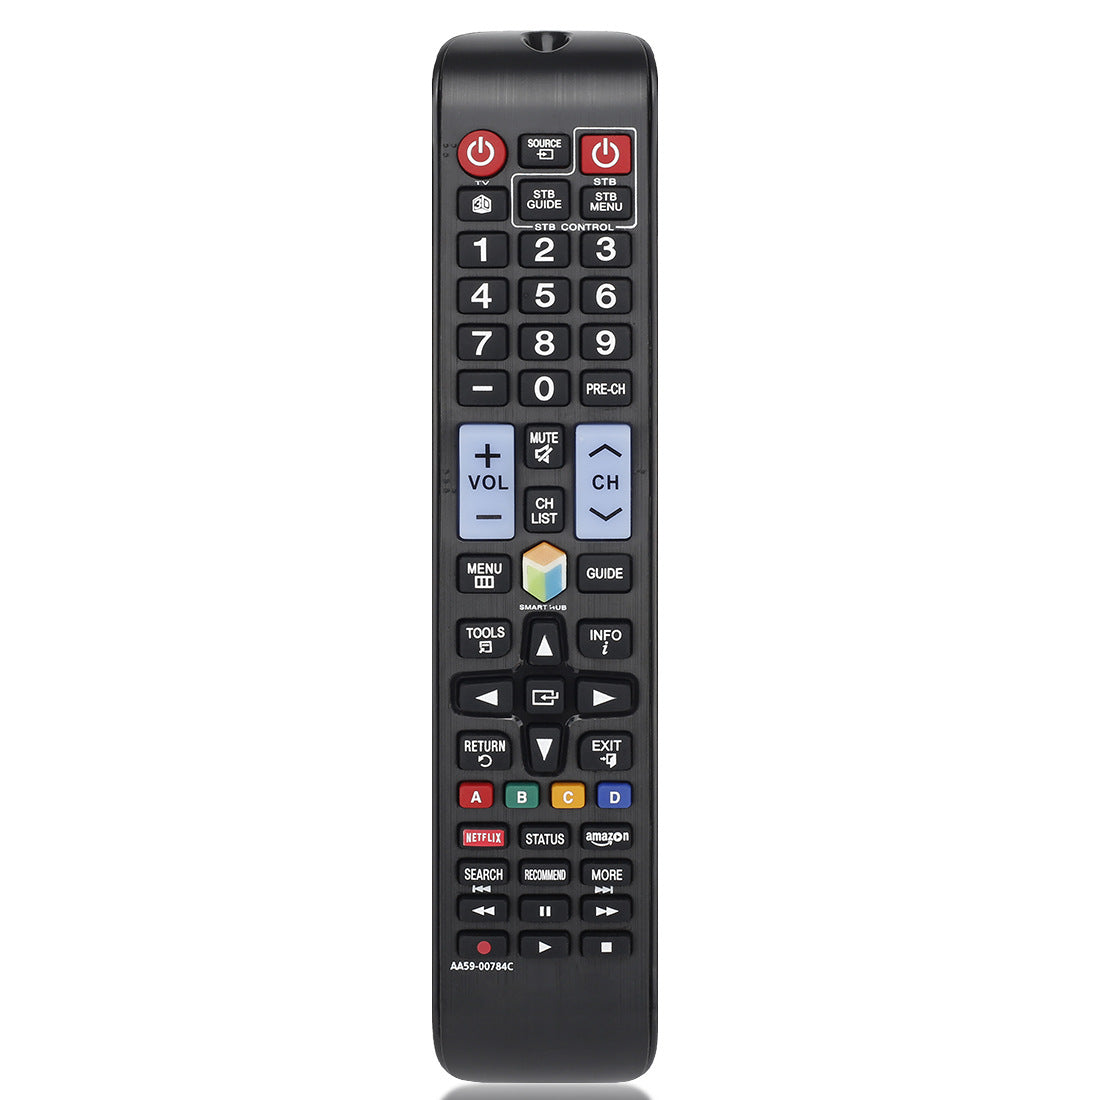 AA59-00784C Universal Replacement Remote for All Samsung LCD LED QLED SUHD UHD HDTV 3D Smart TVs.